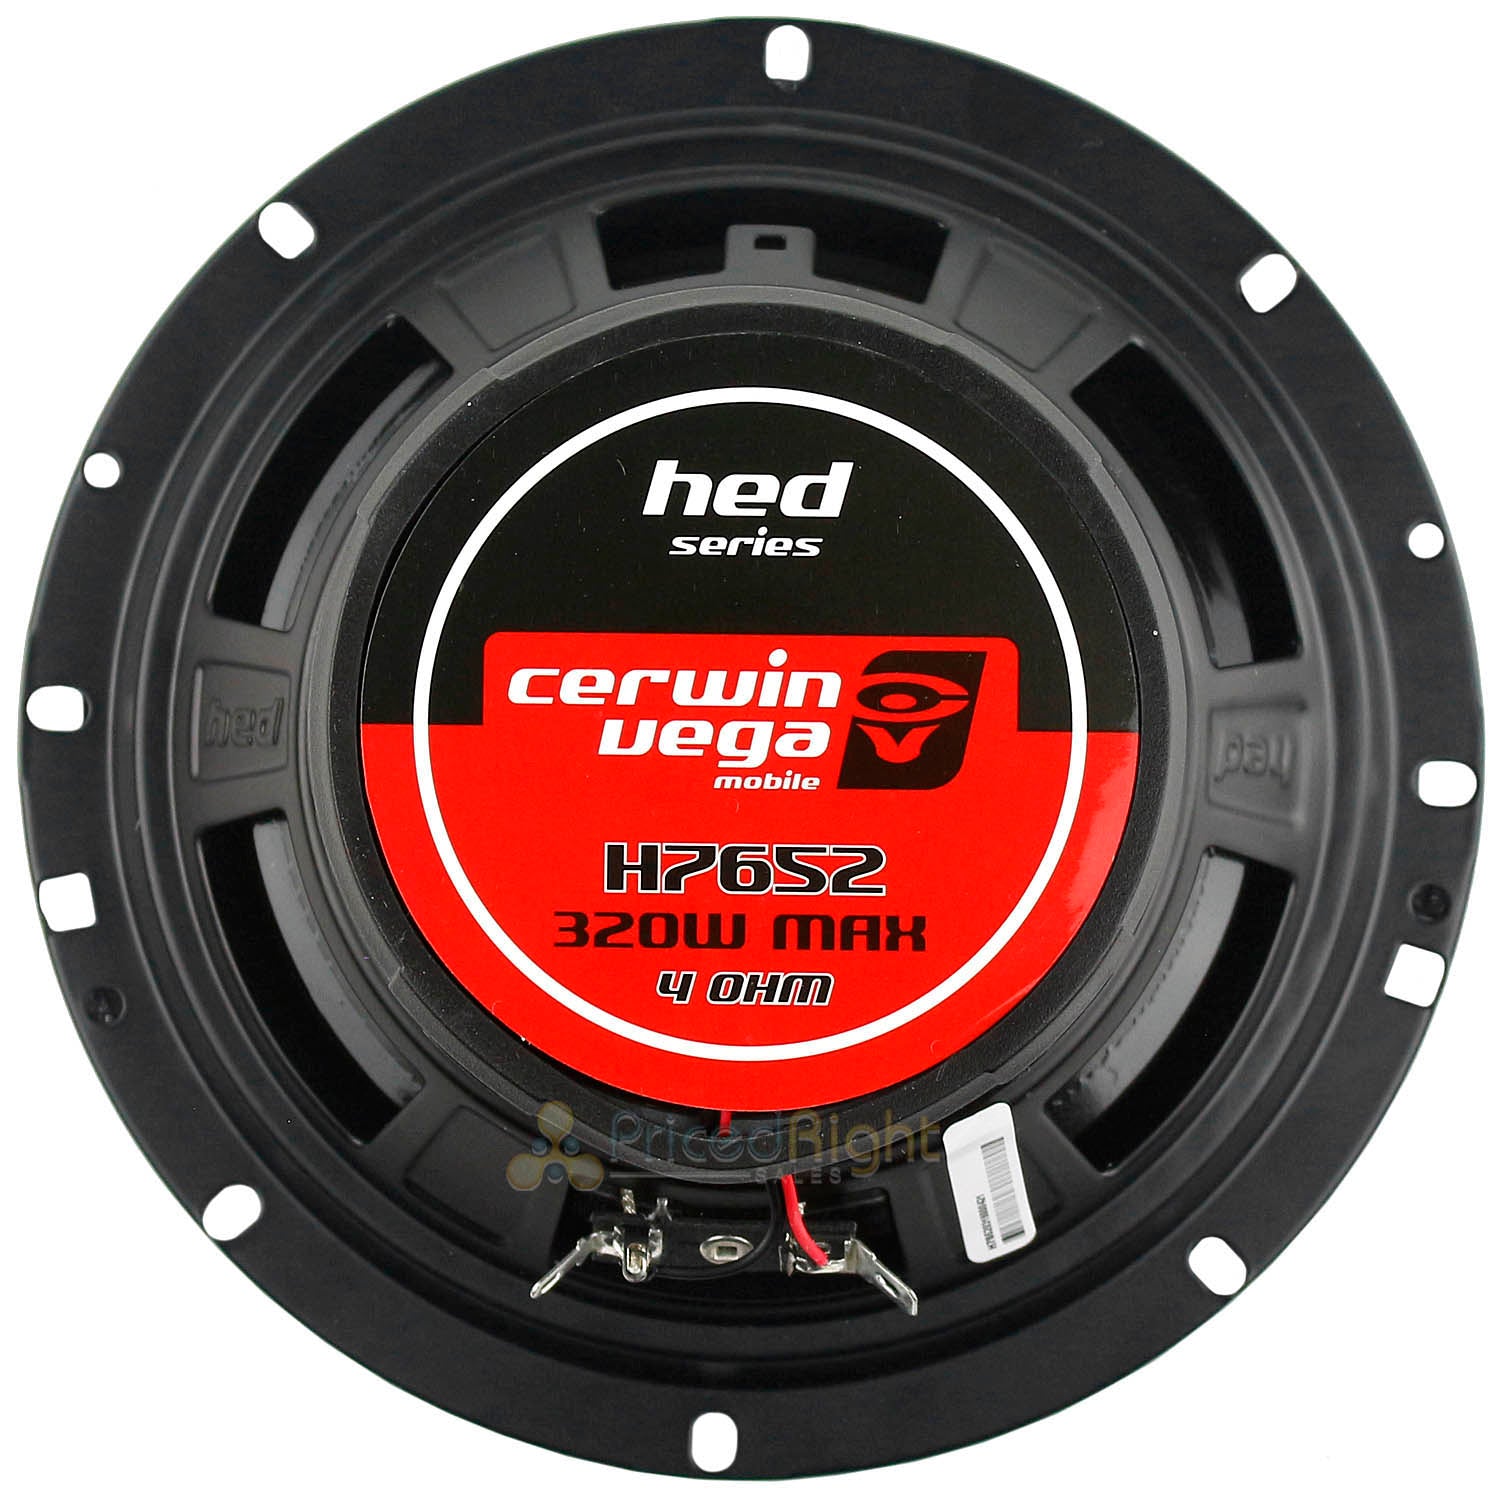 Cewin Vega 6.5" 2-Way Coaxial Speaker System 320 Watts Max HED Series CER-H7652